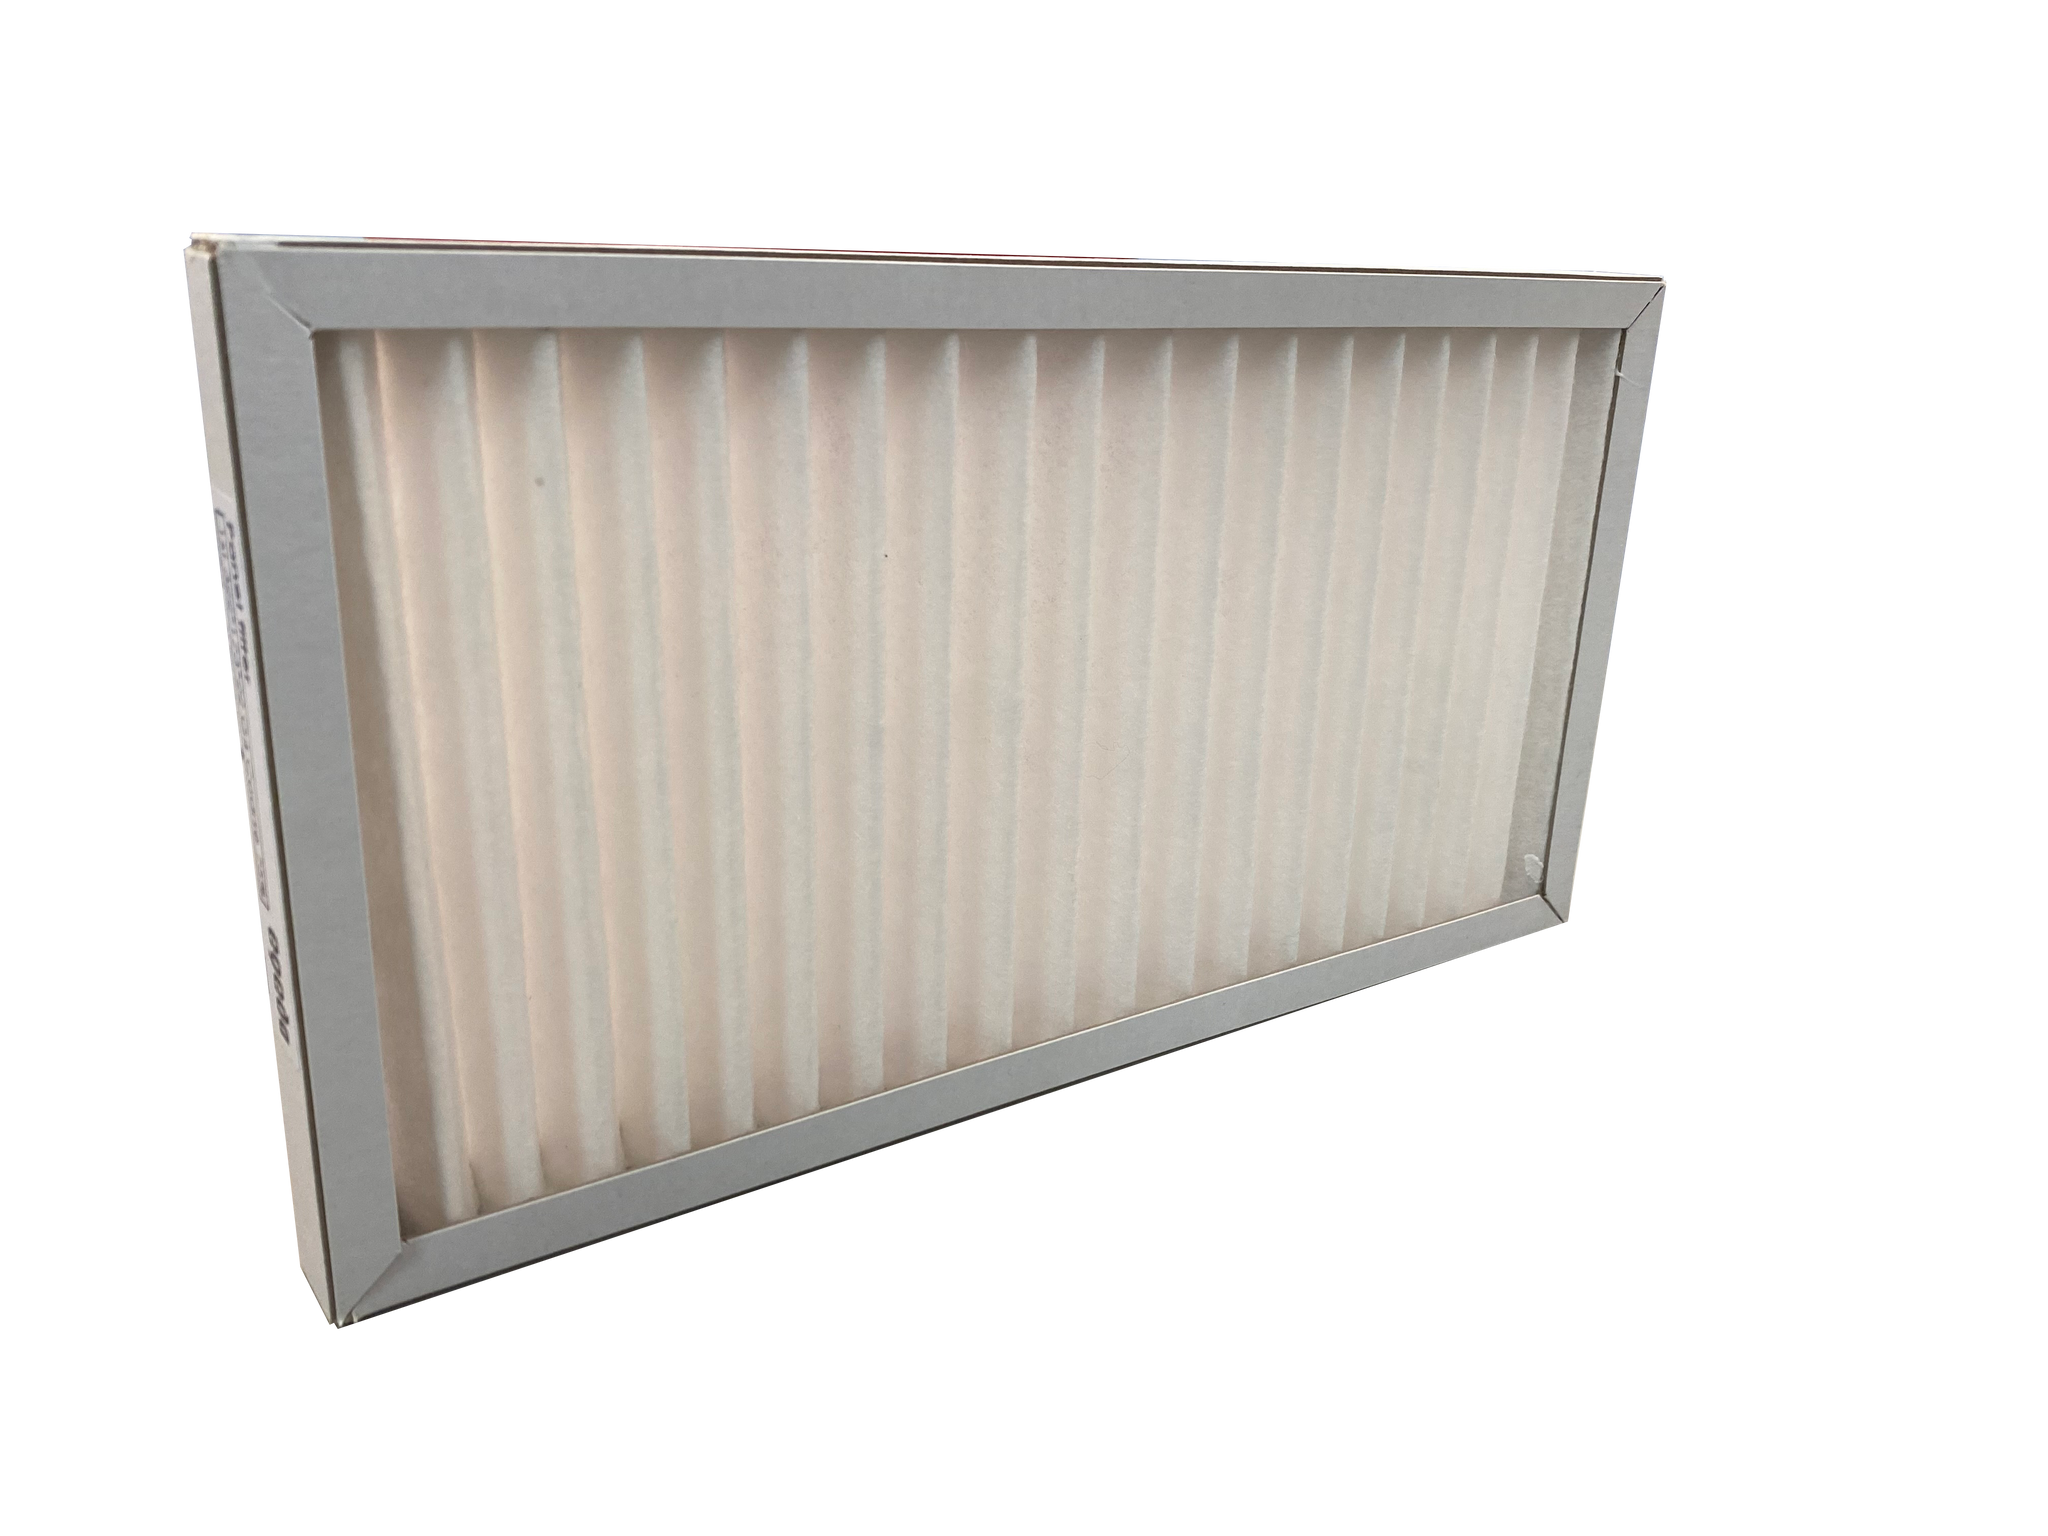 Filter G4 voor Clima 400 & 300A / 173 mm x 322 mm x 23 mm